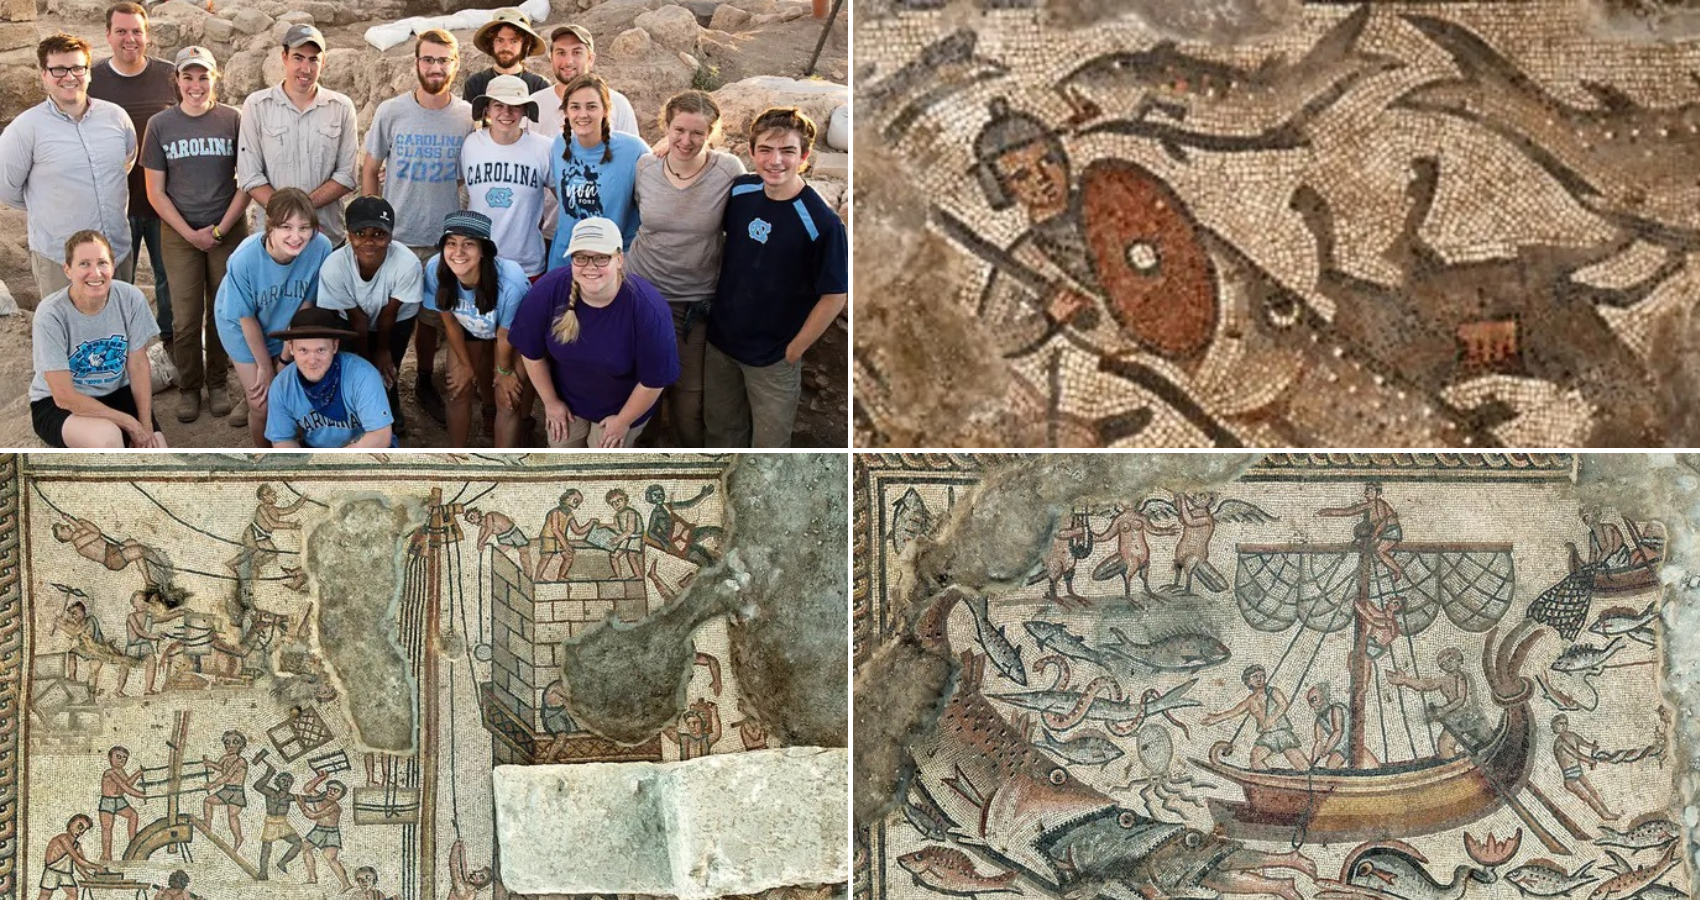 1,600-year-old biblical mosaic discovered in Israel, sheds light on ancient Judaism